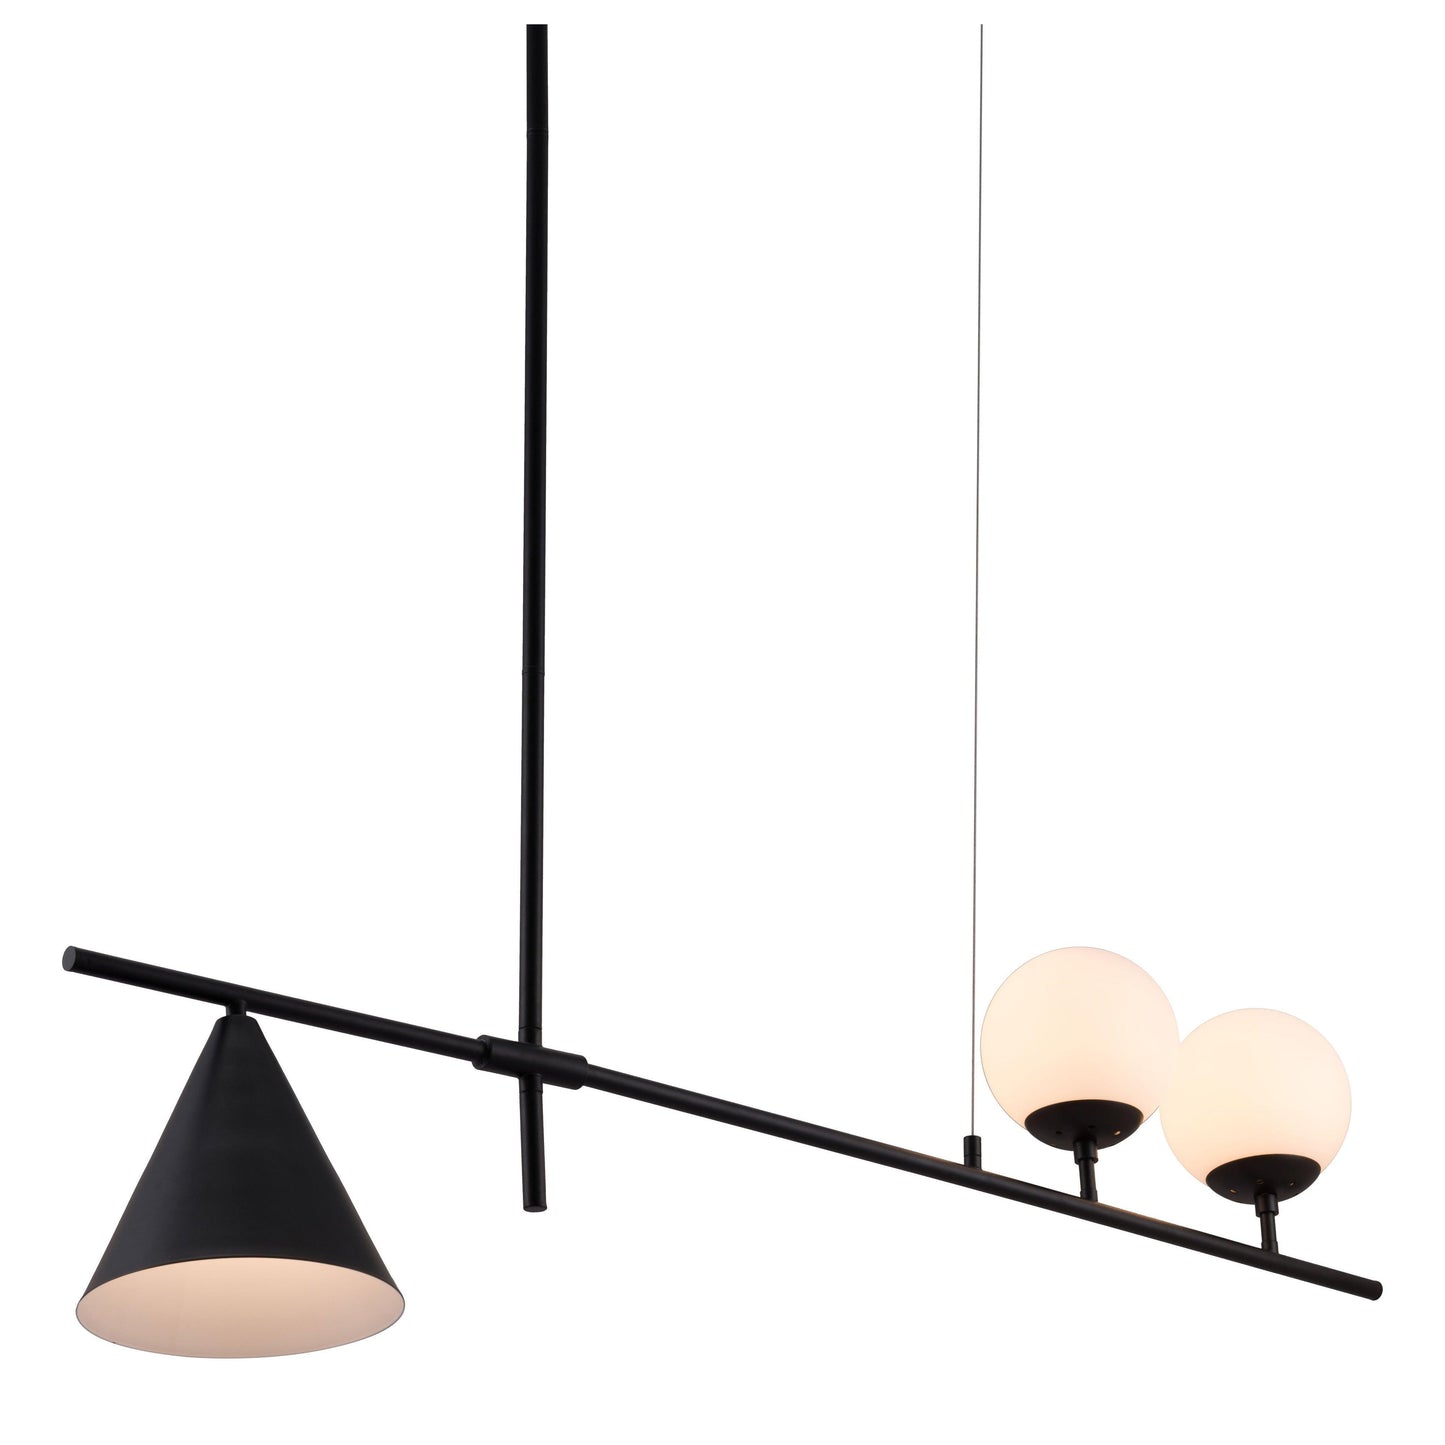 Richiza Ceiling Lamp Black - Sideboards and Things Brand_Zuo Modern, Color_Black, Depth_0-10, Features_Adjustable Height, Finish_Hand Painted, Finish_Polished, Finish_Powder Coated, Glass Type_Frosted Glass, Height_20-30, Materials_Glass, Materials_Metal, Metal Type_Steel, Product Type_Pendant, Width_40-50